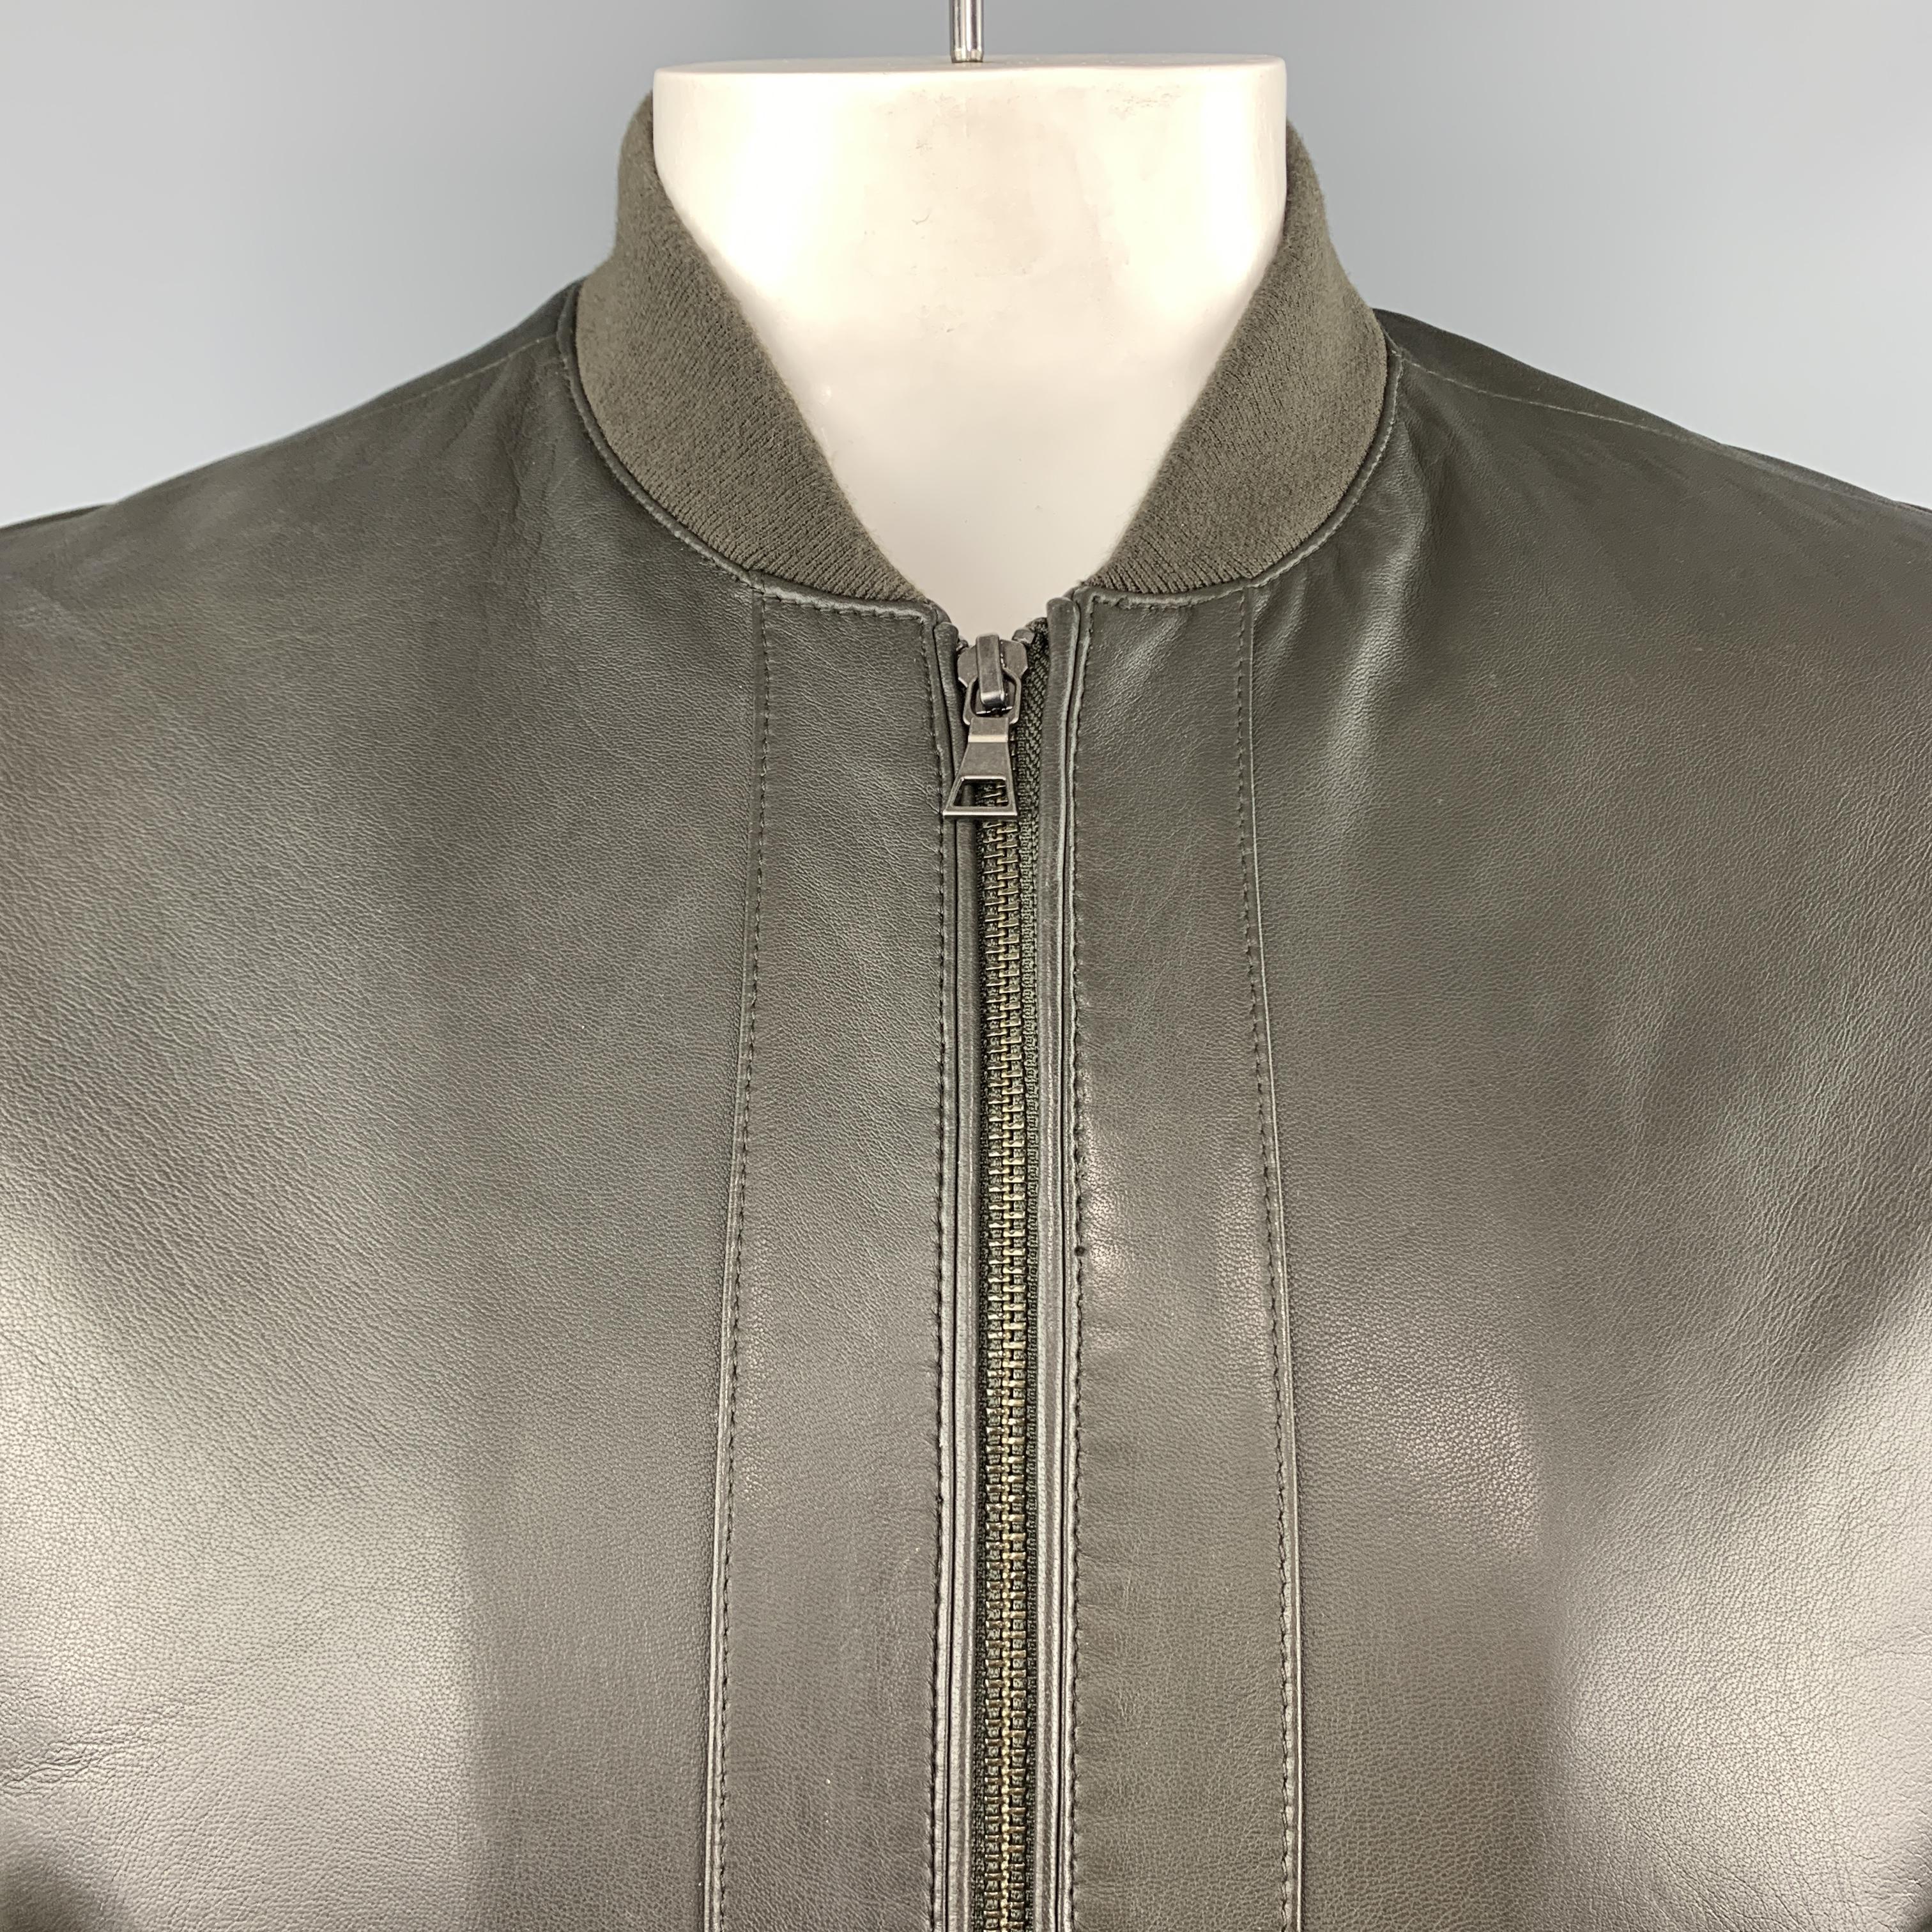 VINCE bomber jacket comes in deep olive green leather with a baseball collar, slanted zip pockets, and quilted suede sleeves.
 
Excellent Pre-Owned Condition.
Marked: L
 
Measurements:
 
Shoulder: 19 in.
Chest: 48 in.
Sleeve: 25.5 in.
Length: 27.5